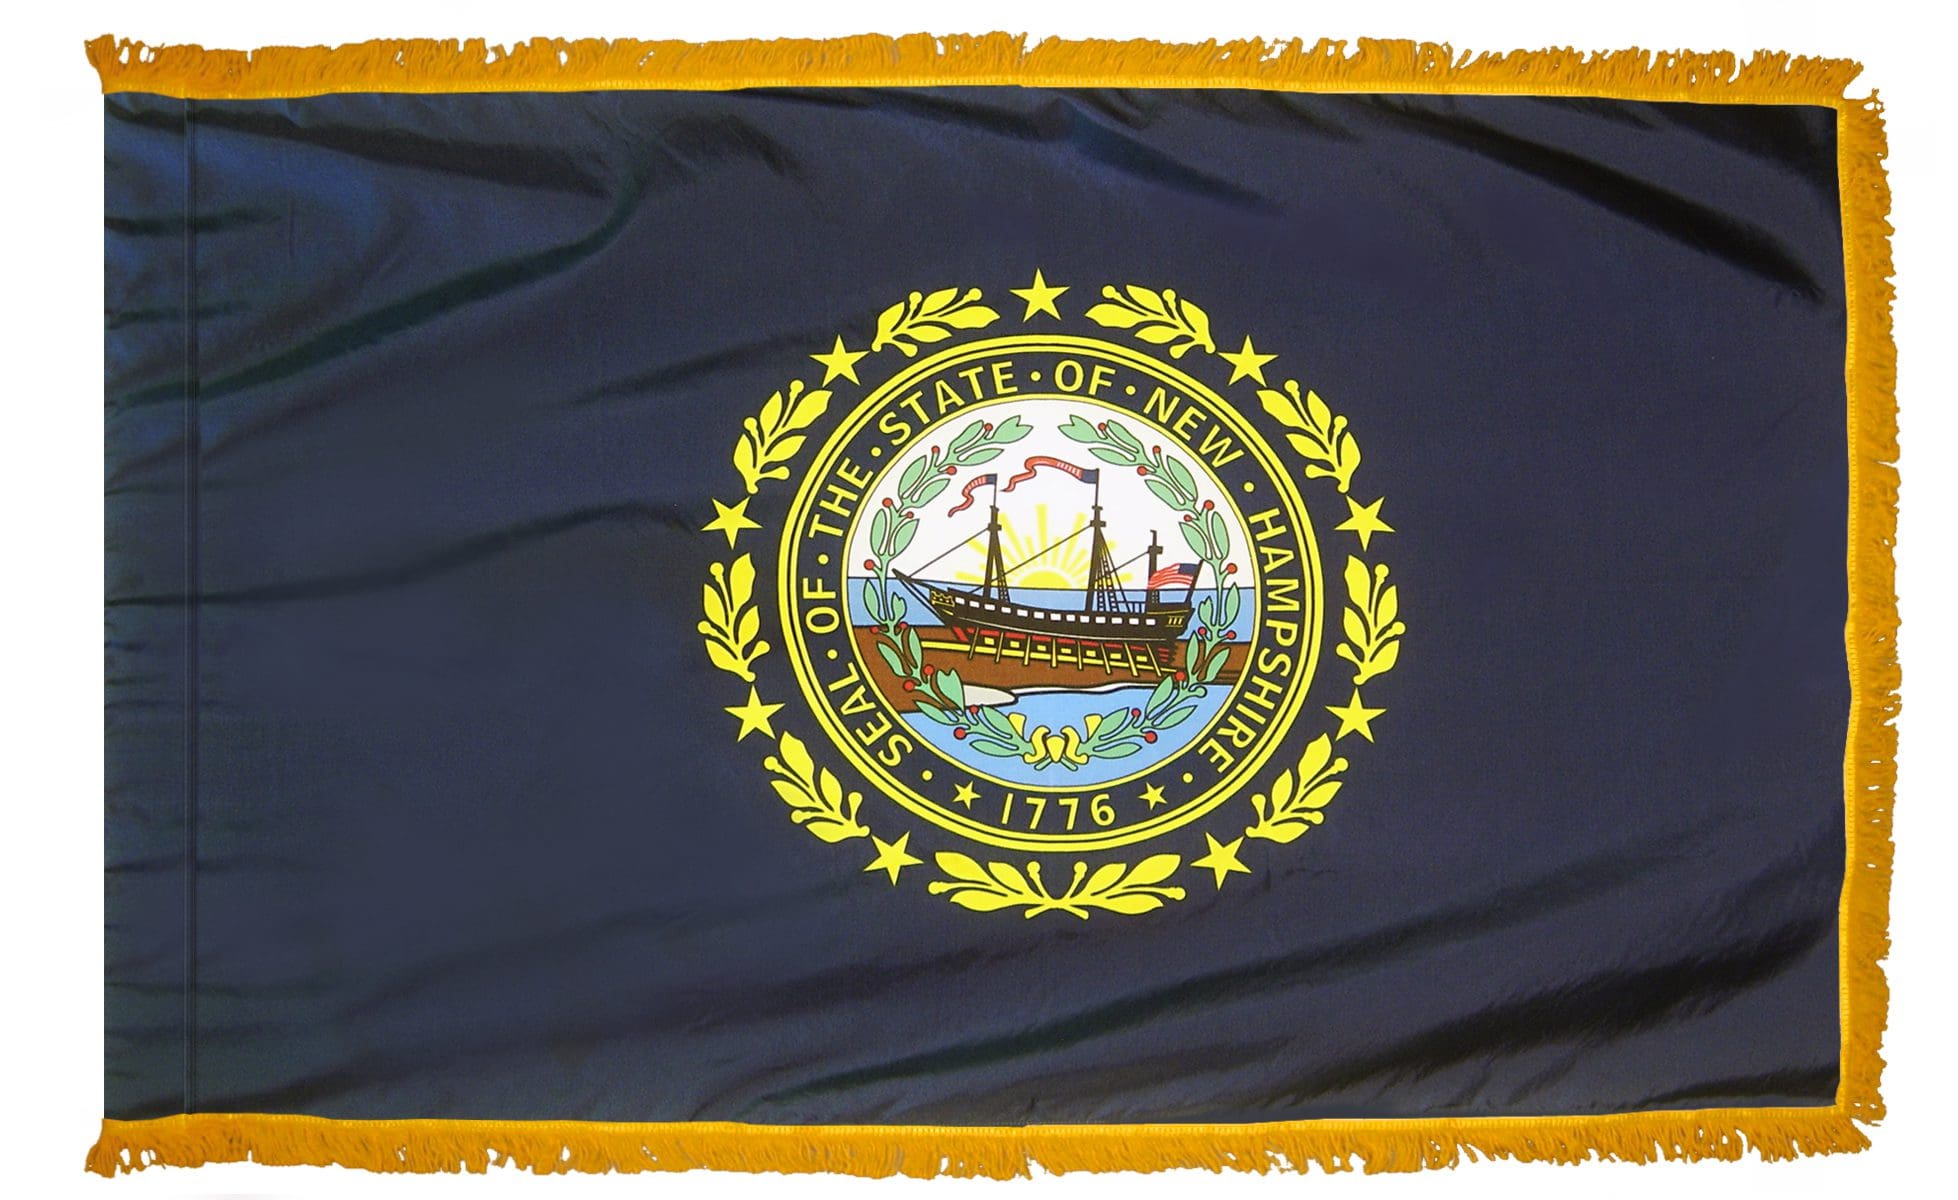 New Hampshire State Flag 3x5 or 4x6 ft. (fringed)